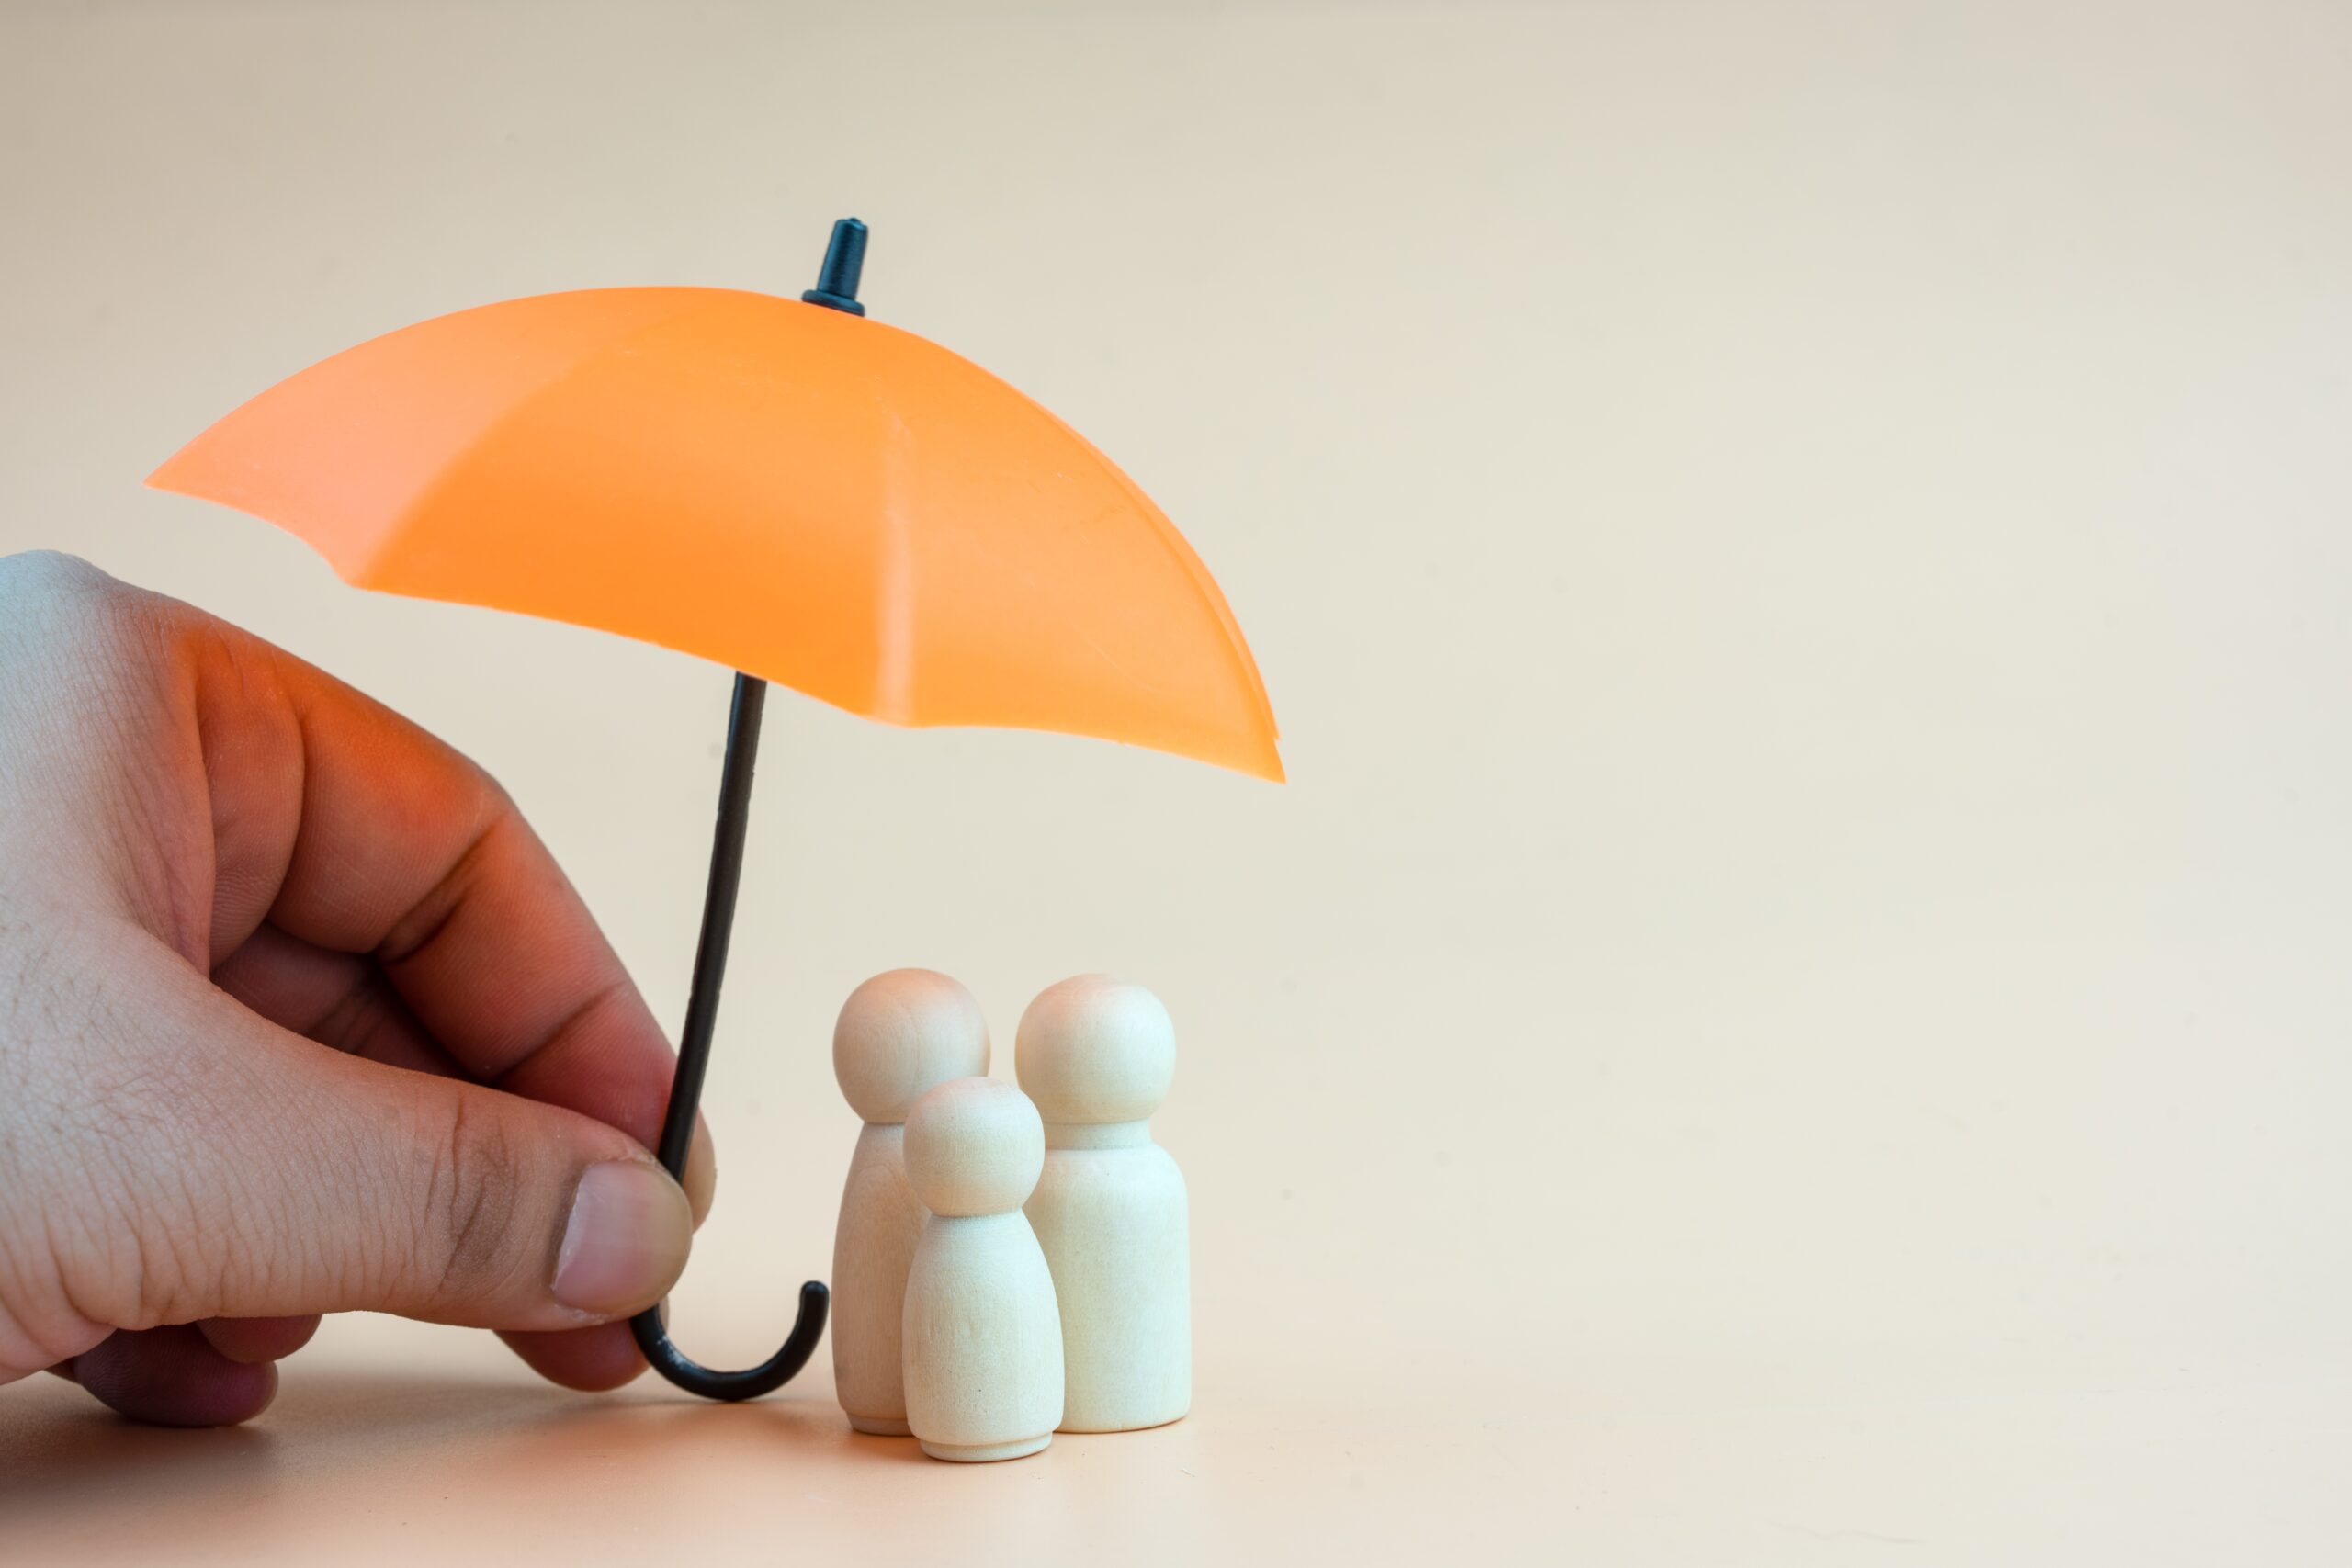 Insurance,Concept.,Wooden,Family,Peg,Dolls,With,Umbrella.,Family,,Life,